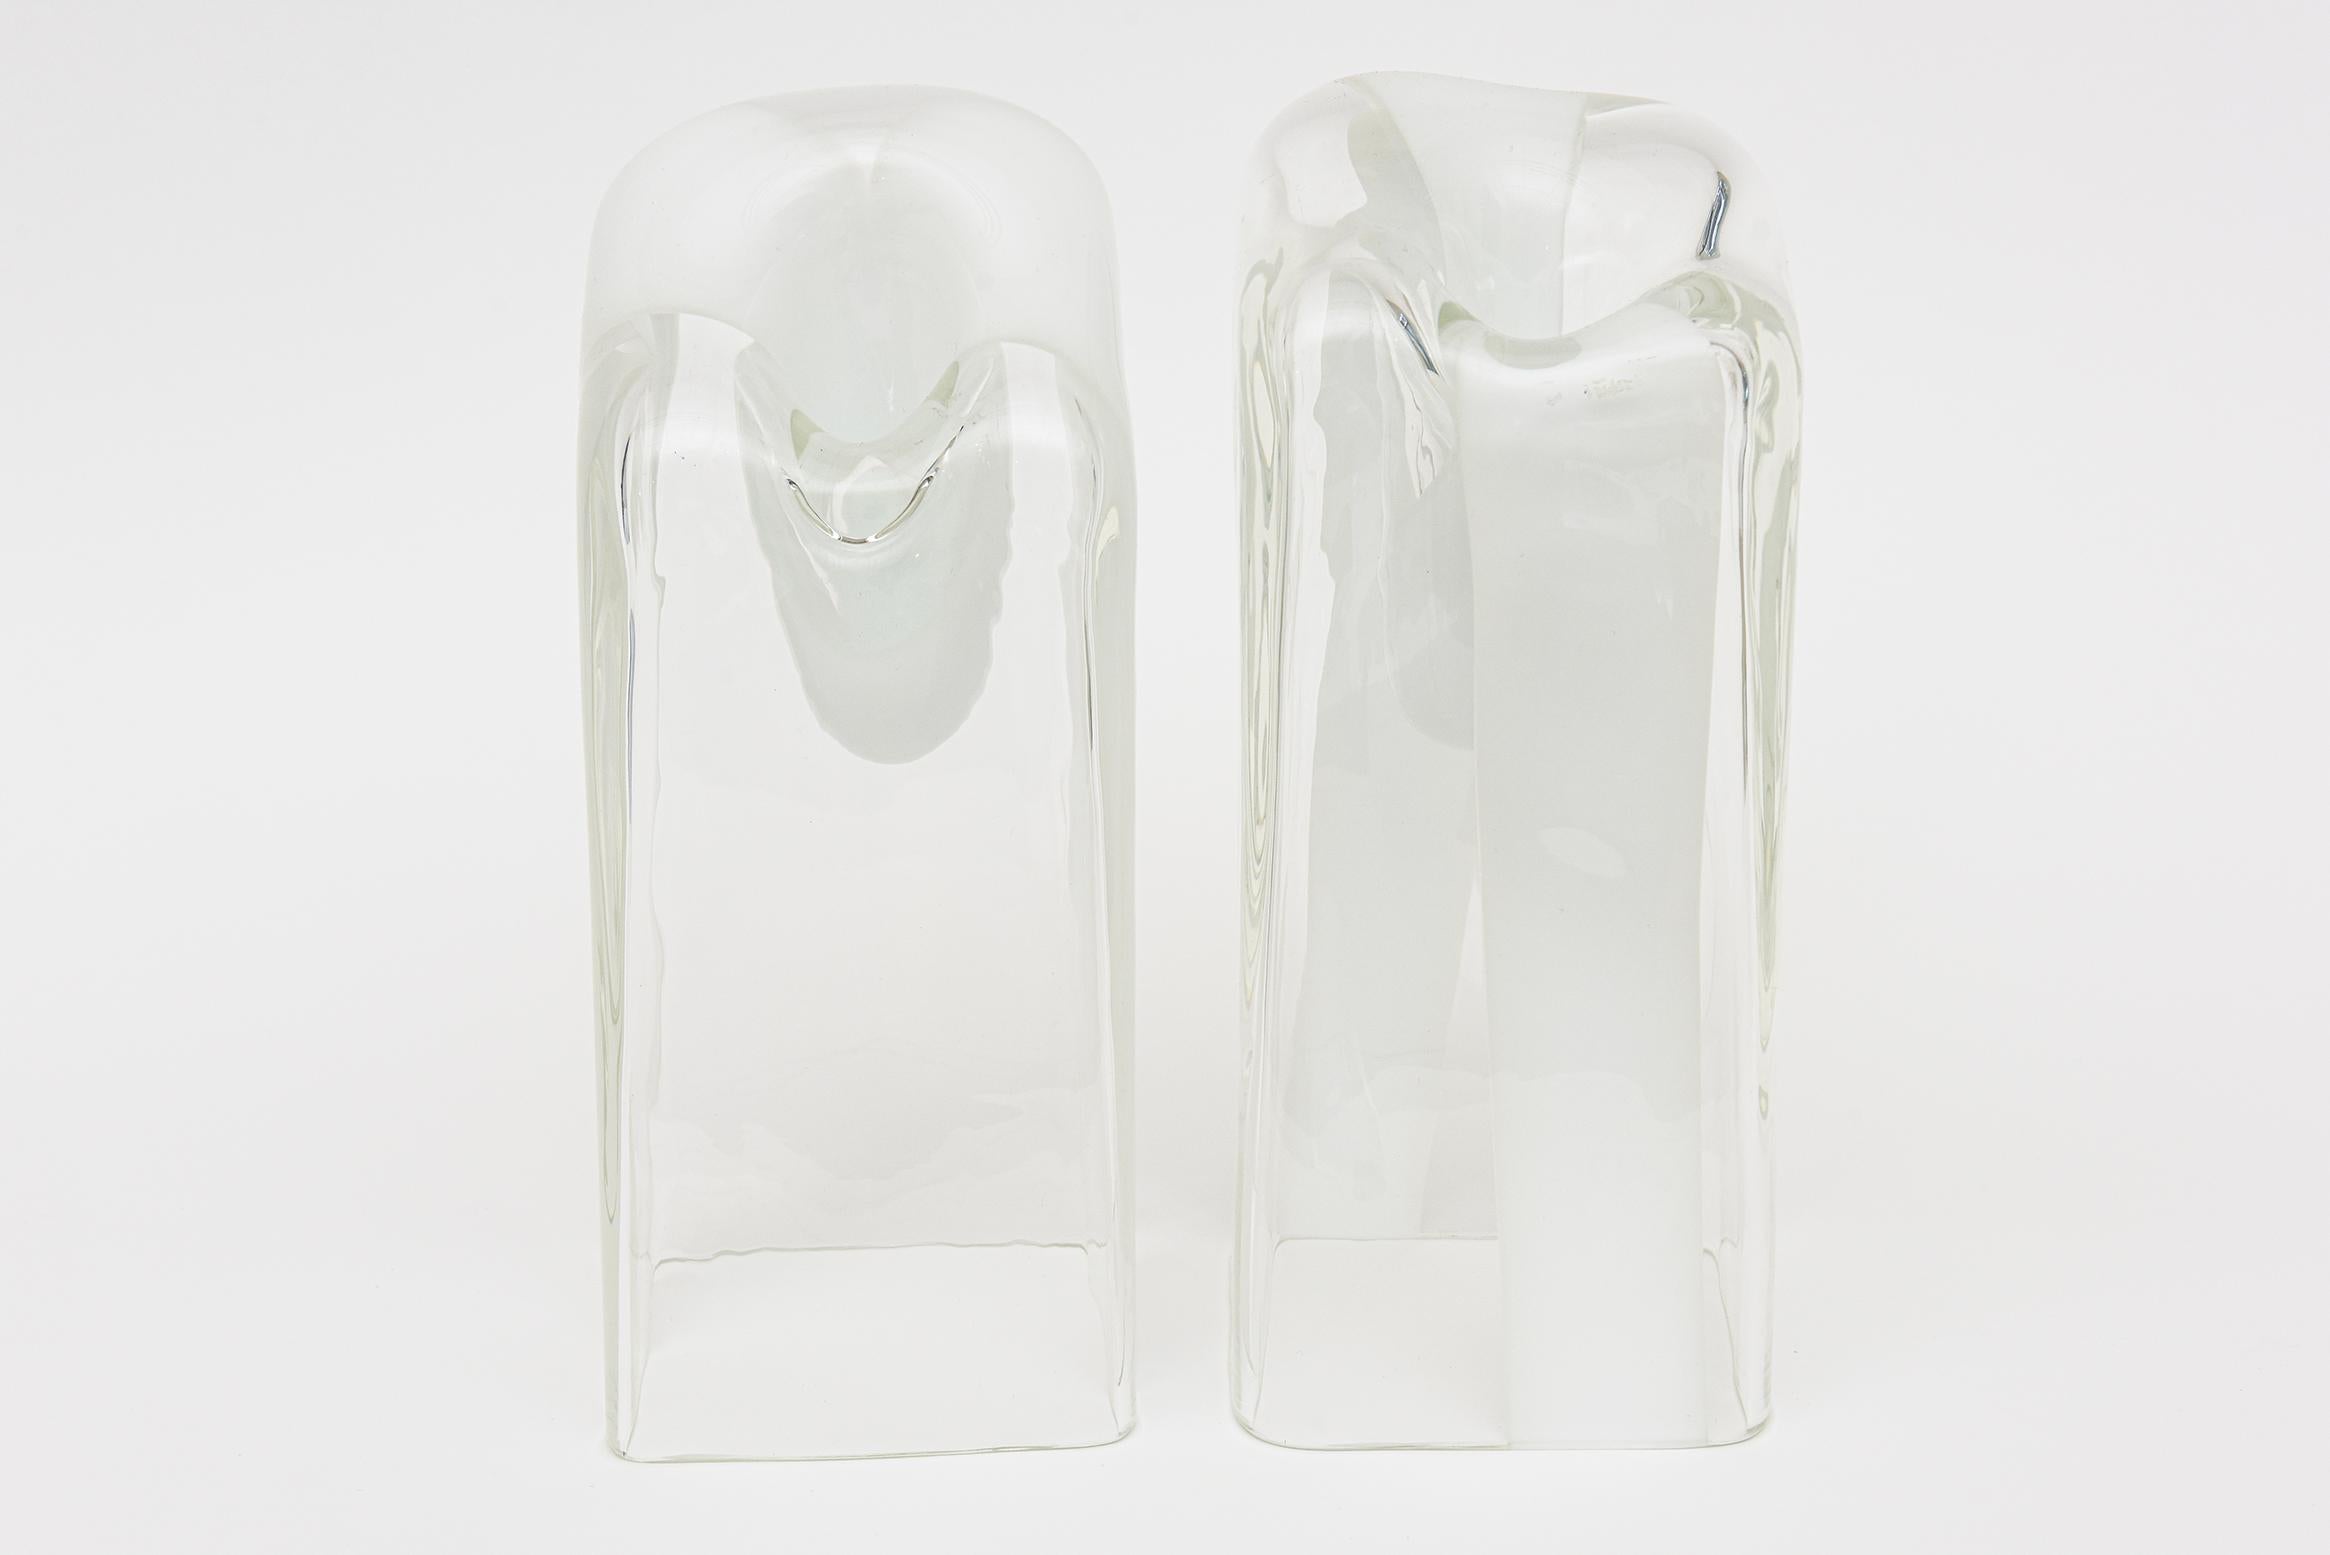 These very special and unusual vintage Murano vases, vessels and or glass sculptures are by Antonio da Ros for Cenedese and from the 70's. They are each handblown glass and vary in blob size and slight height and width. They are a pair and this is